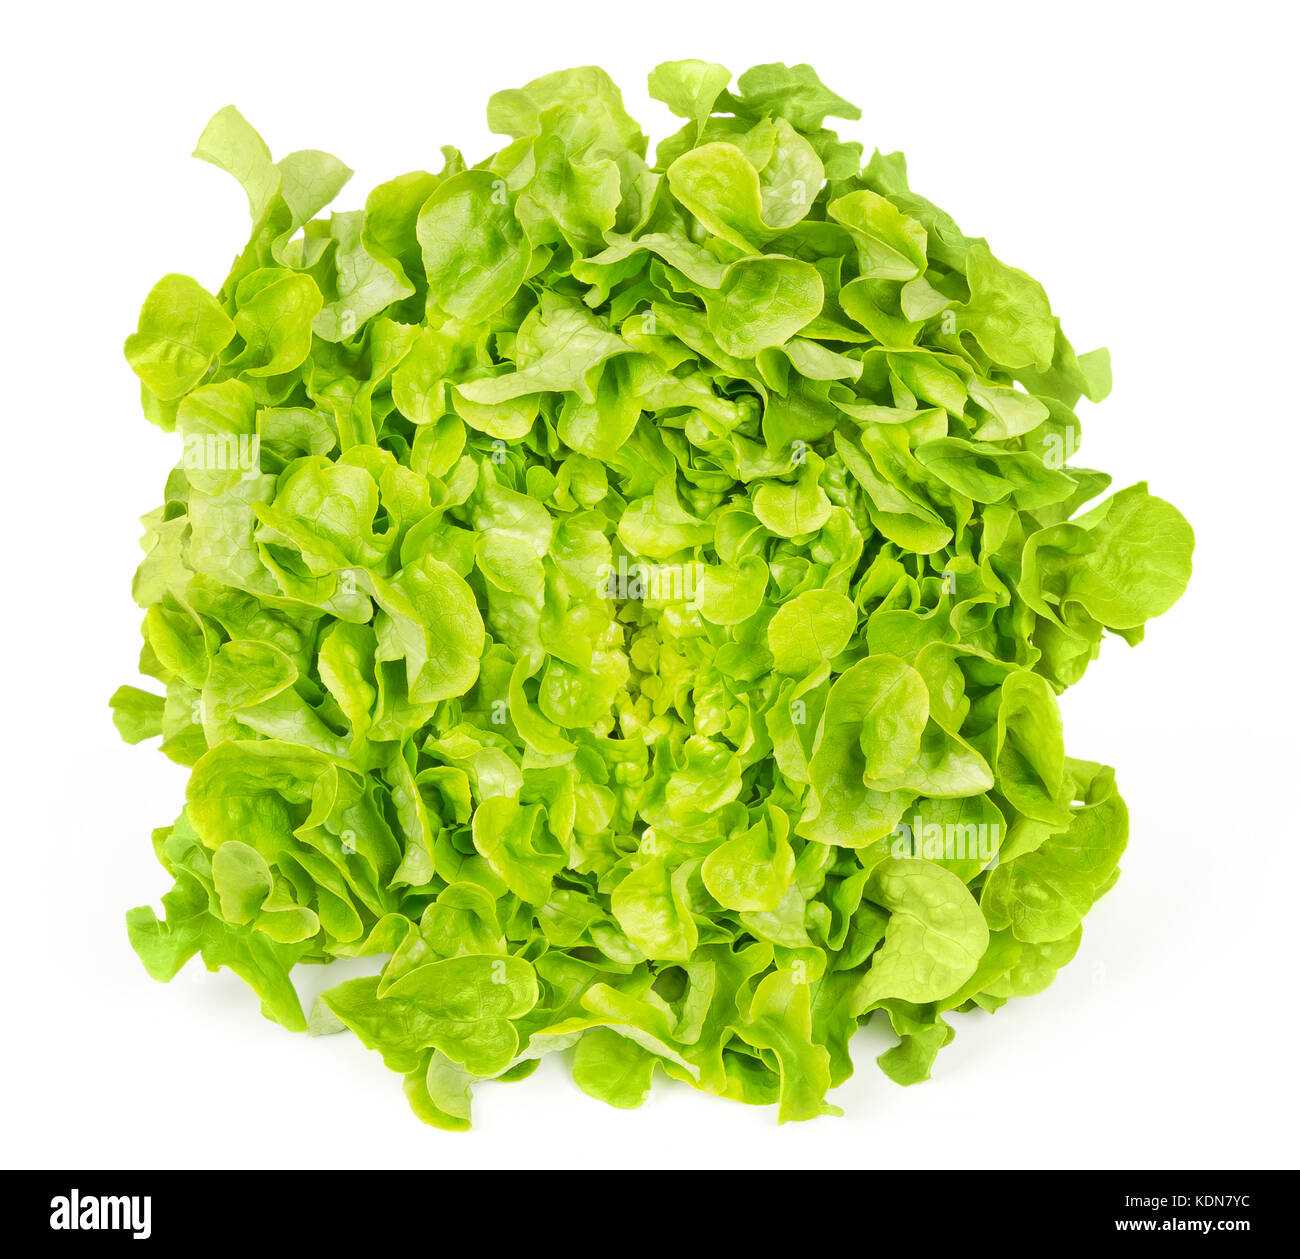 Green oak leaf lettuce front view isolated over white. Also called oakleaf, a variety of Lactuca sativa. Green butter lettuce. Photo. Stock Photo